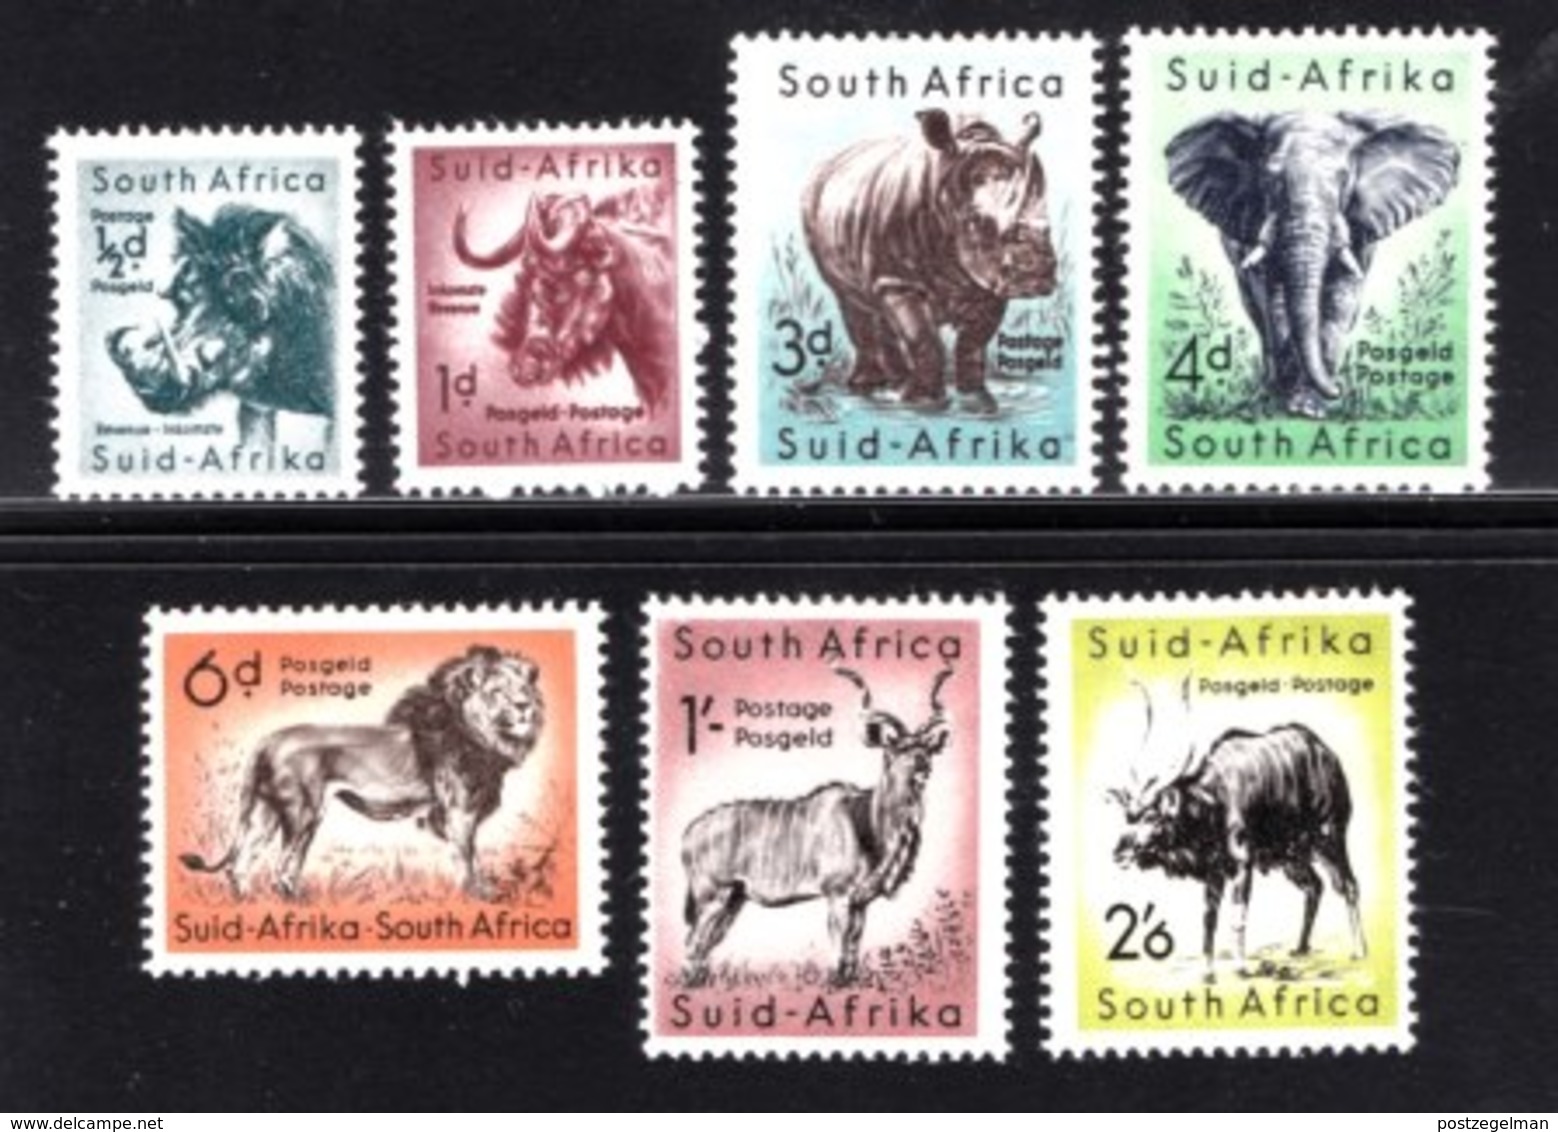 UNION OF SOUTH AFRICA 1959 MNH Def. Series Animals 259=266 #2450 7 Values Only - Wild